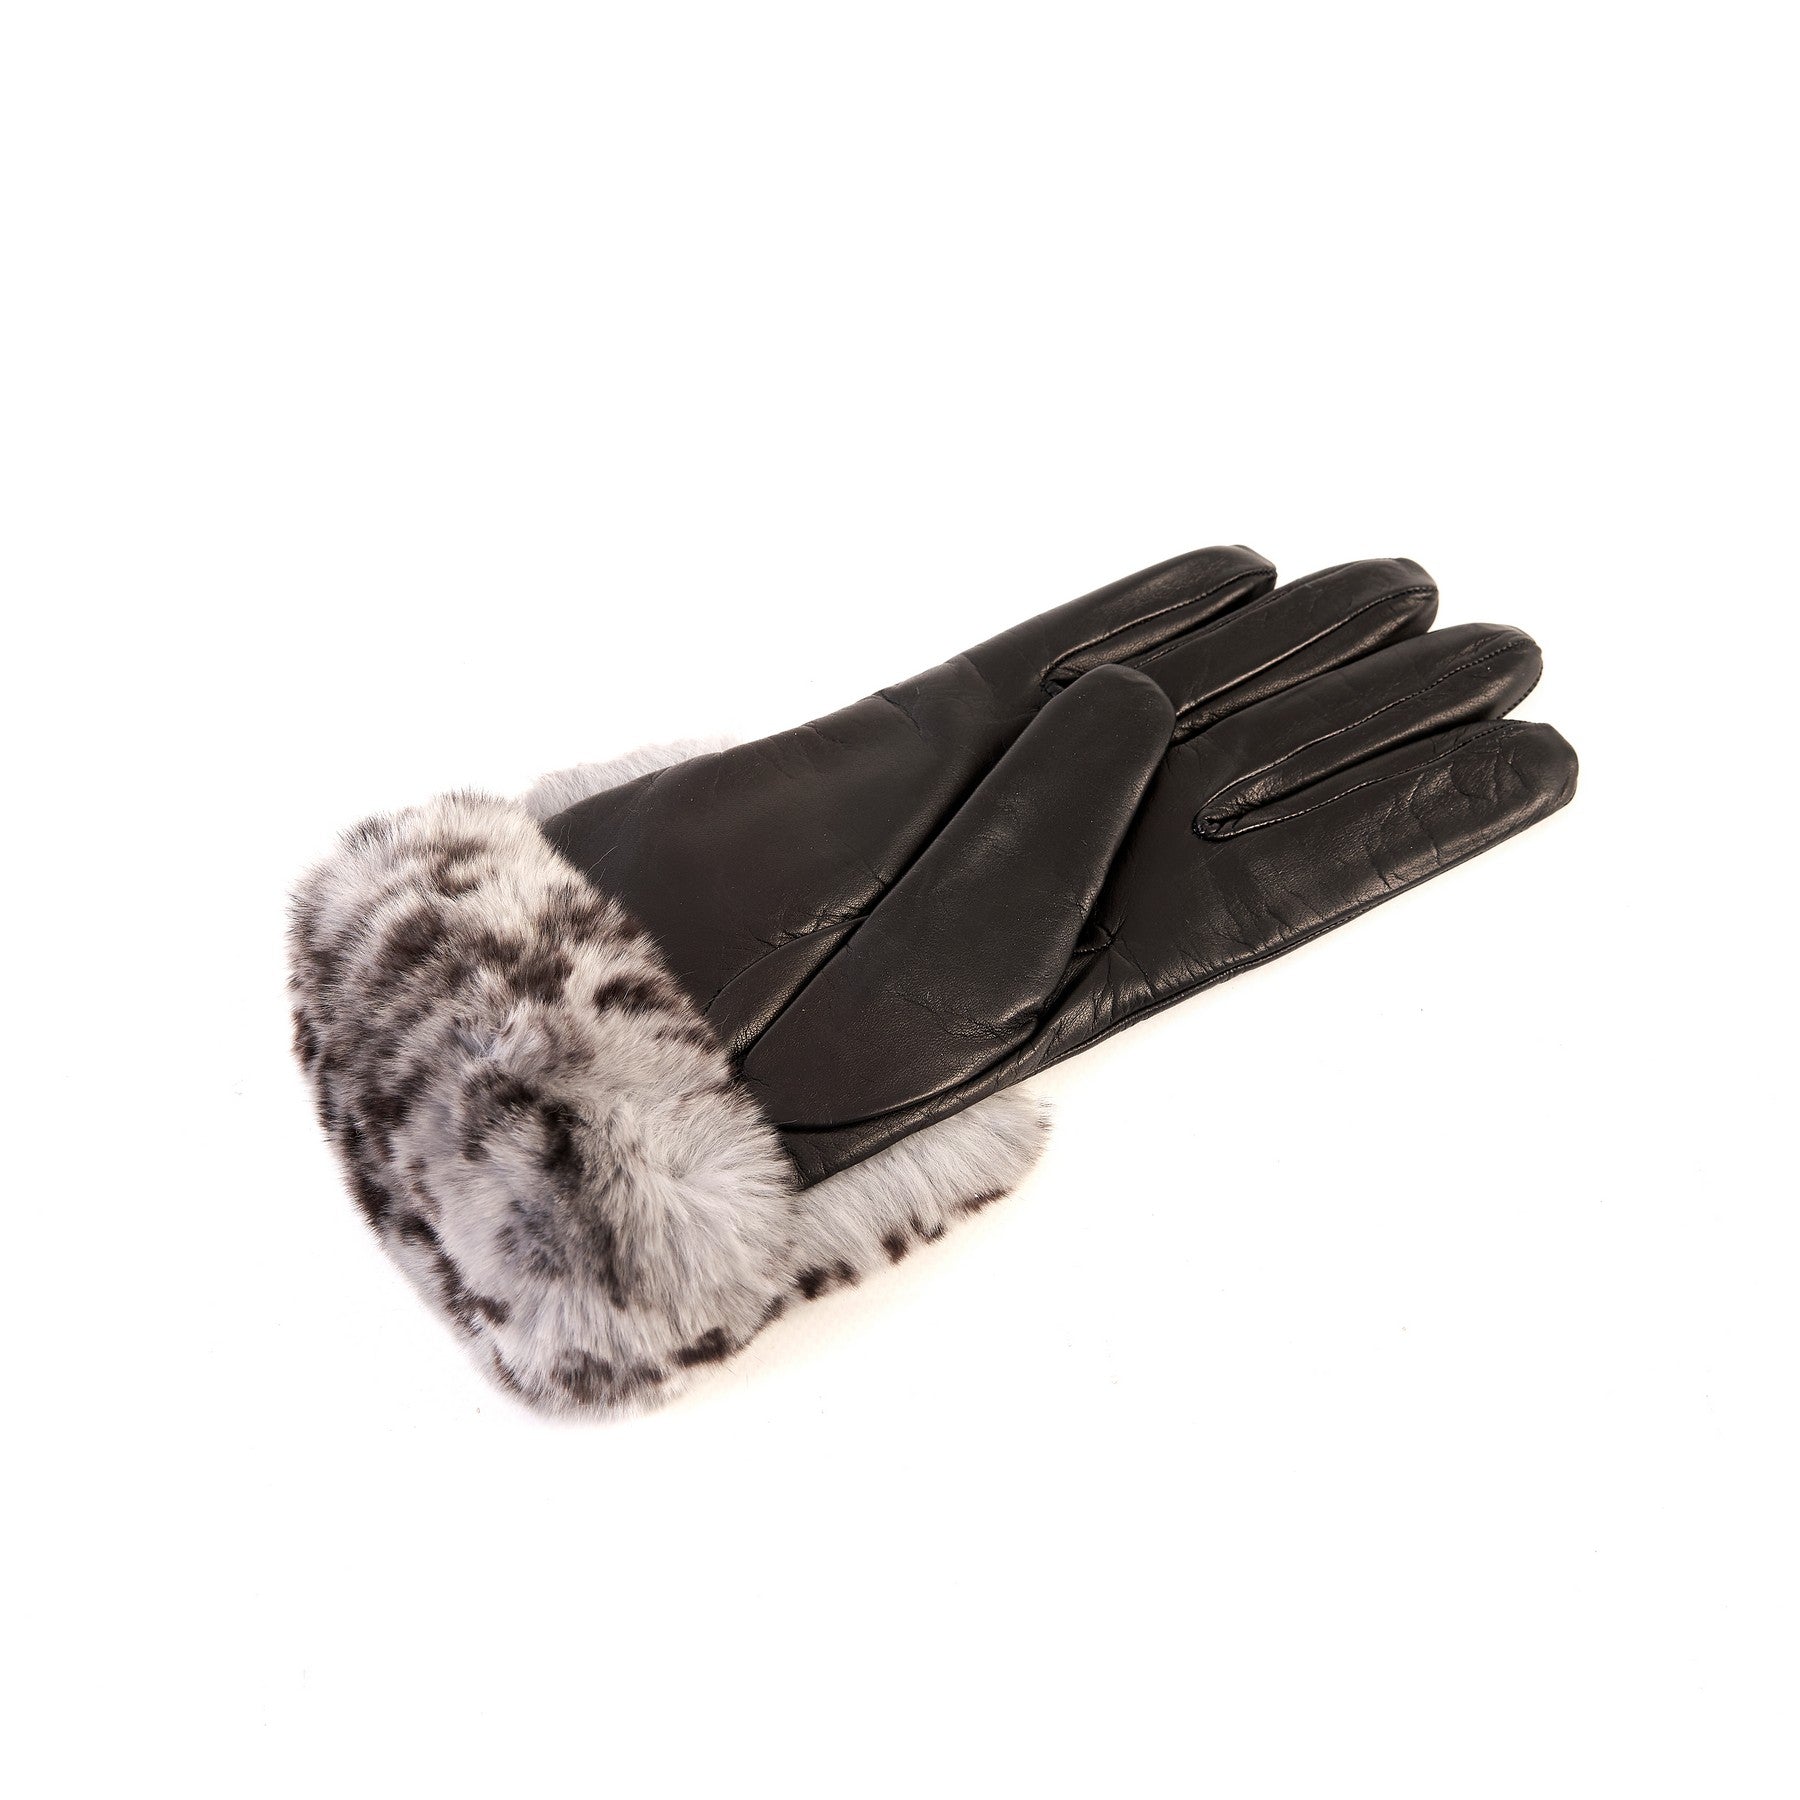 Women's black nappa leather gloves with a printed leo wide real fur panel on the top and cashmere lined